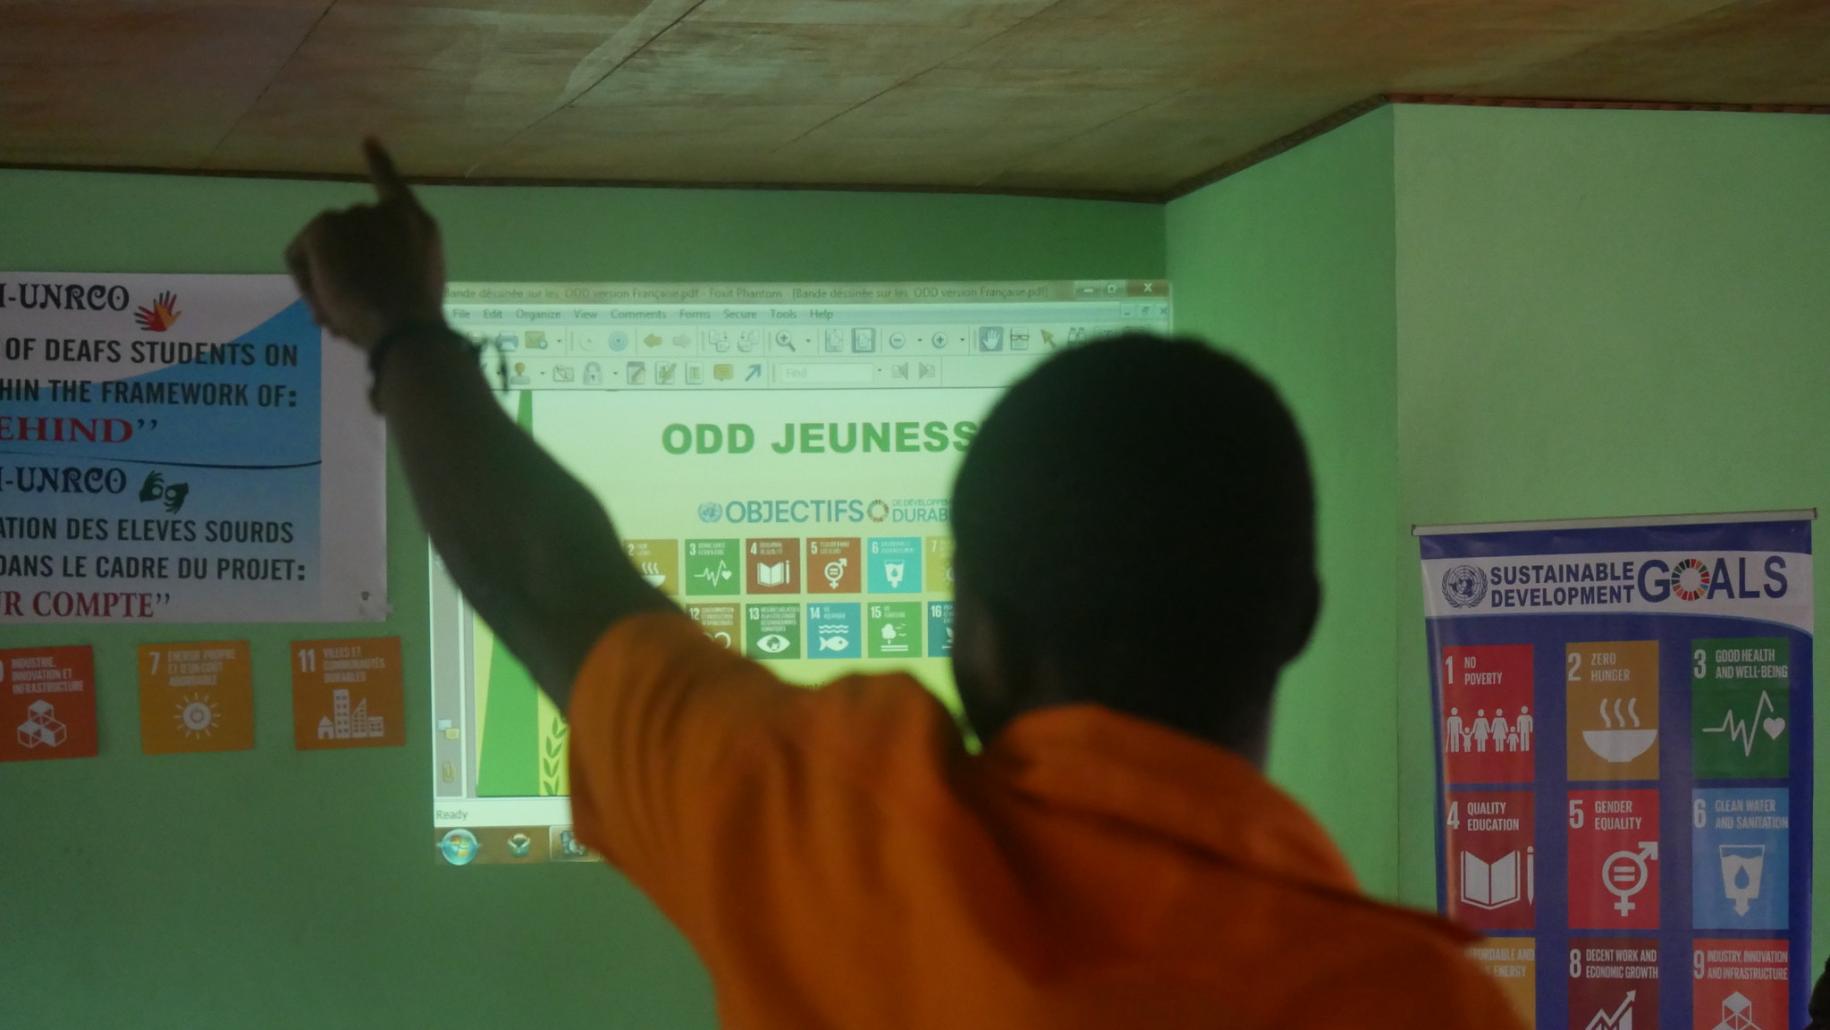 A young boy faces away from the camera is is raising a finger in front a projected screen showing the SDG icons.